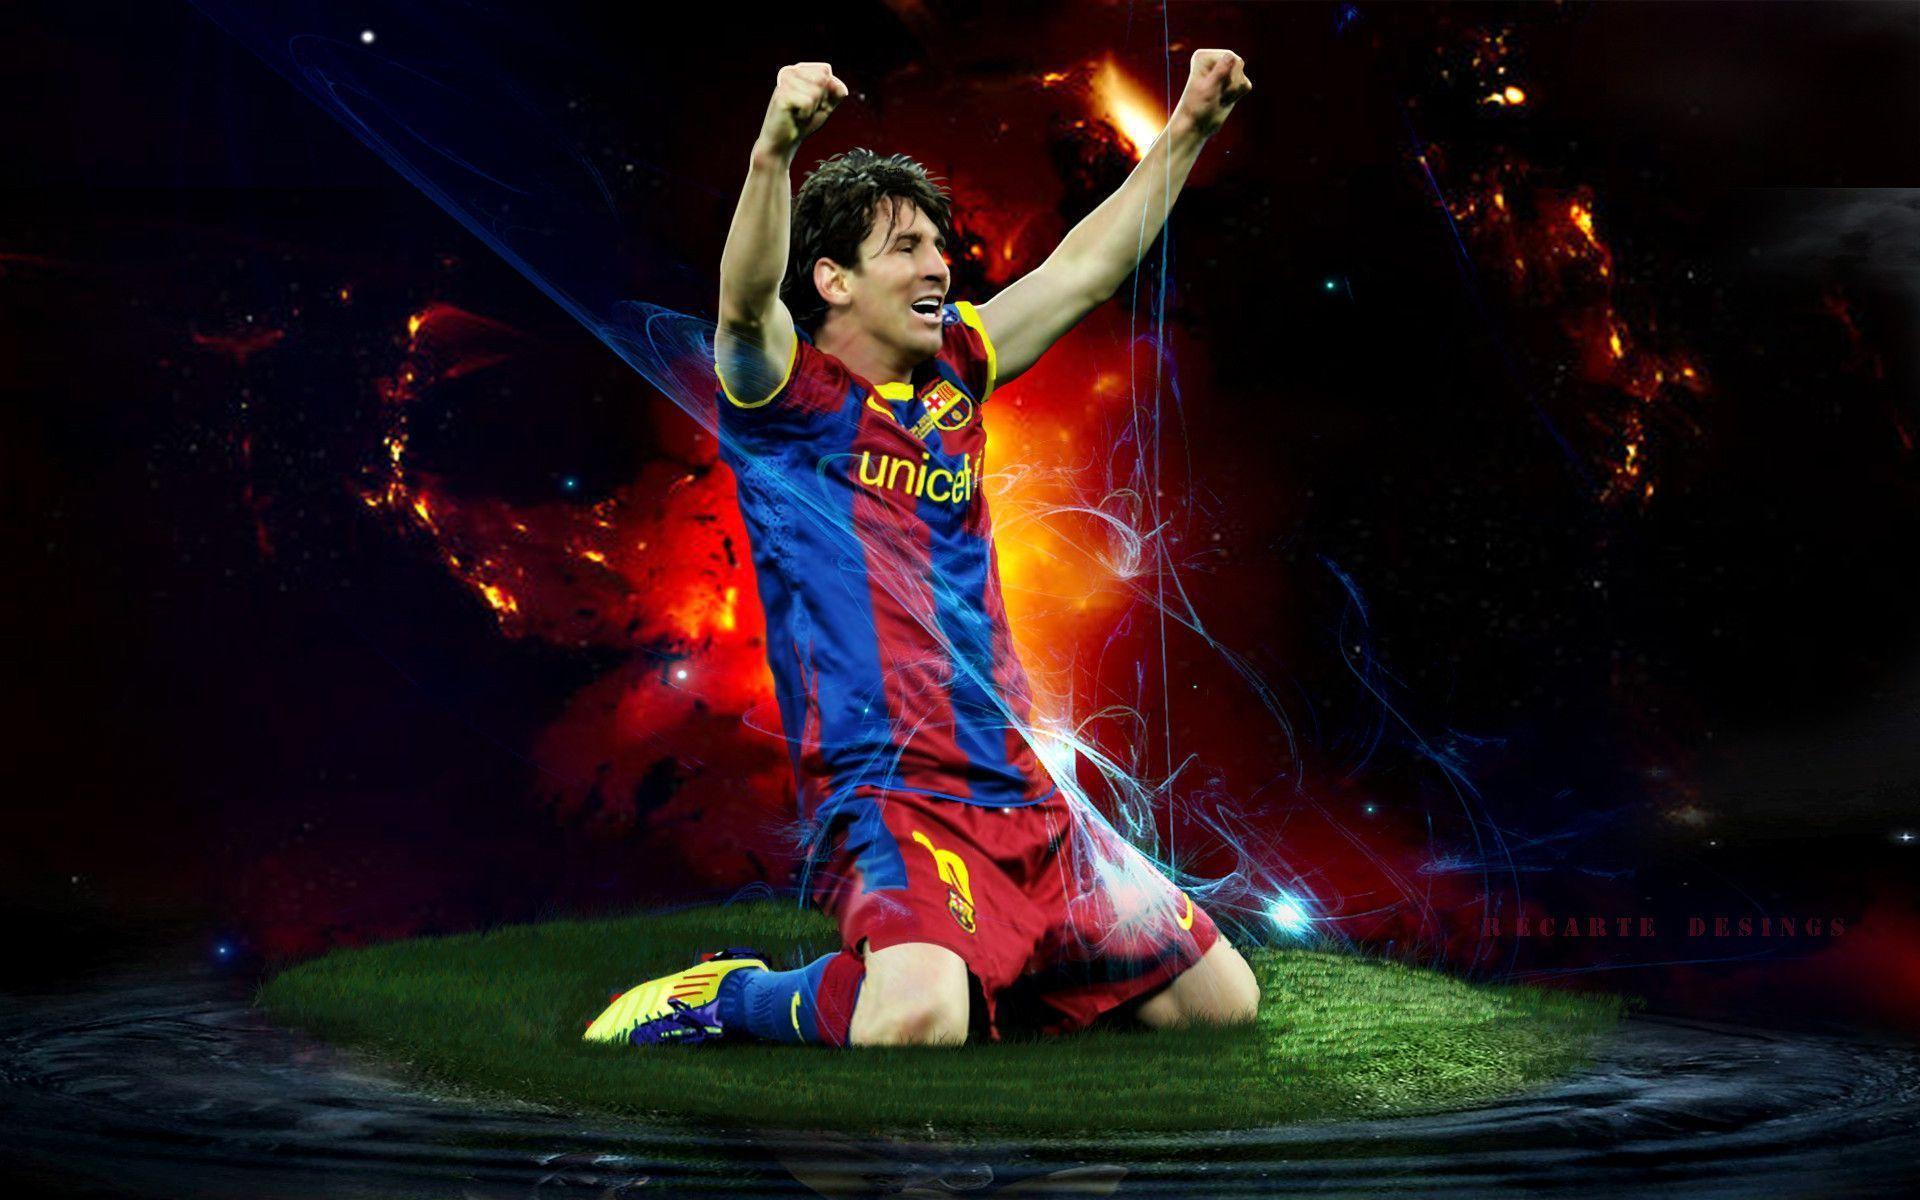 Lionel Messi 2015 1080p HD Wallpapers